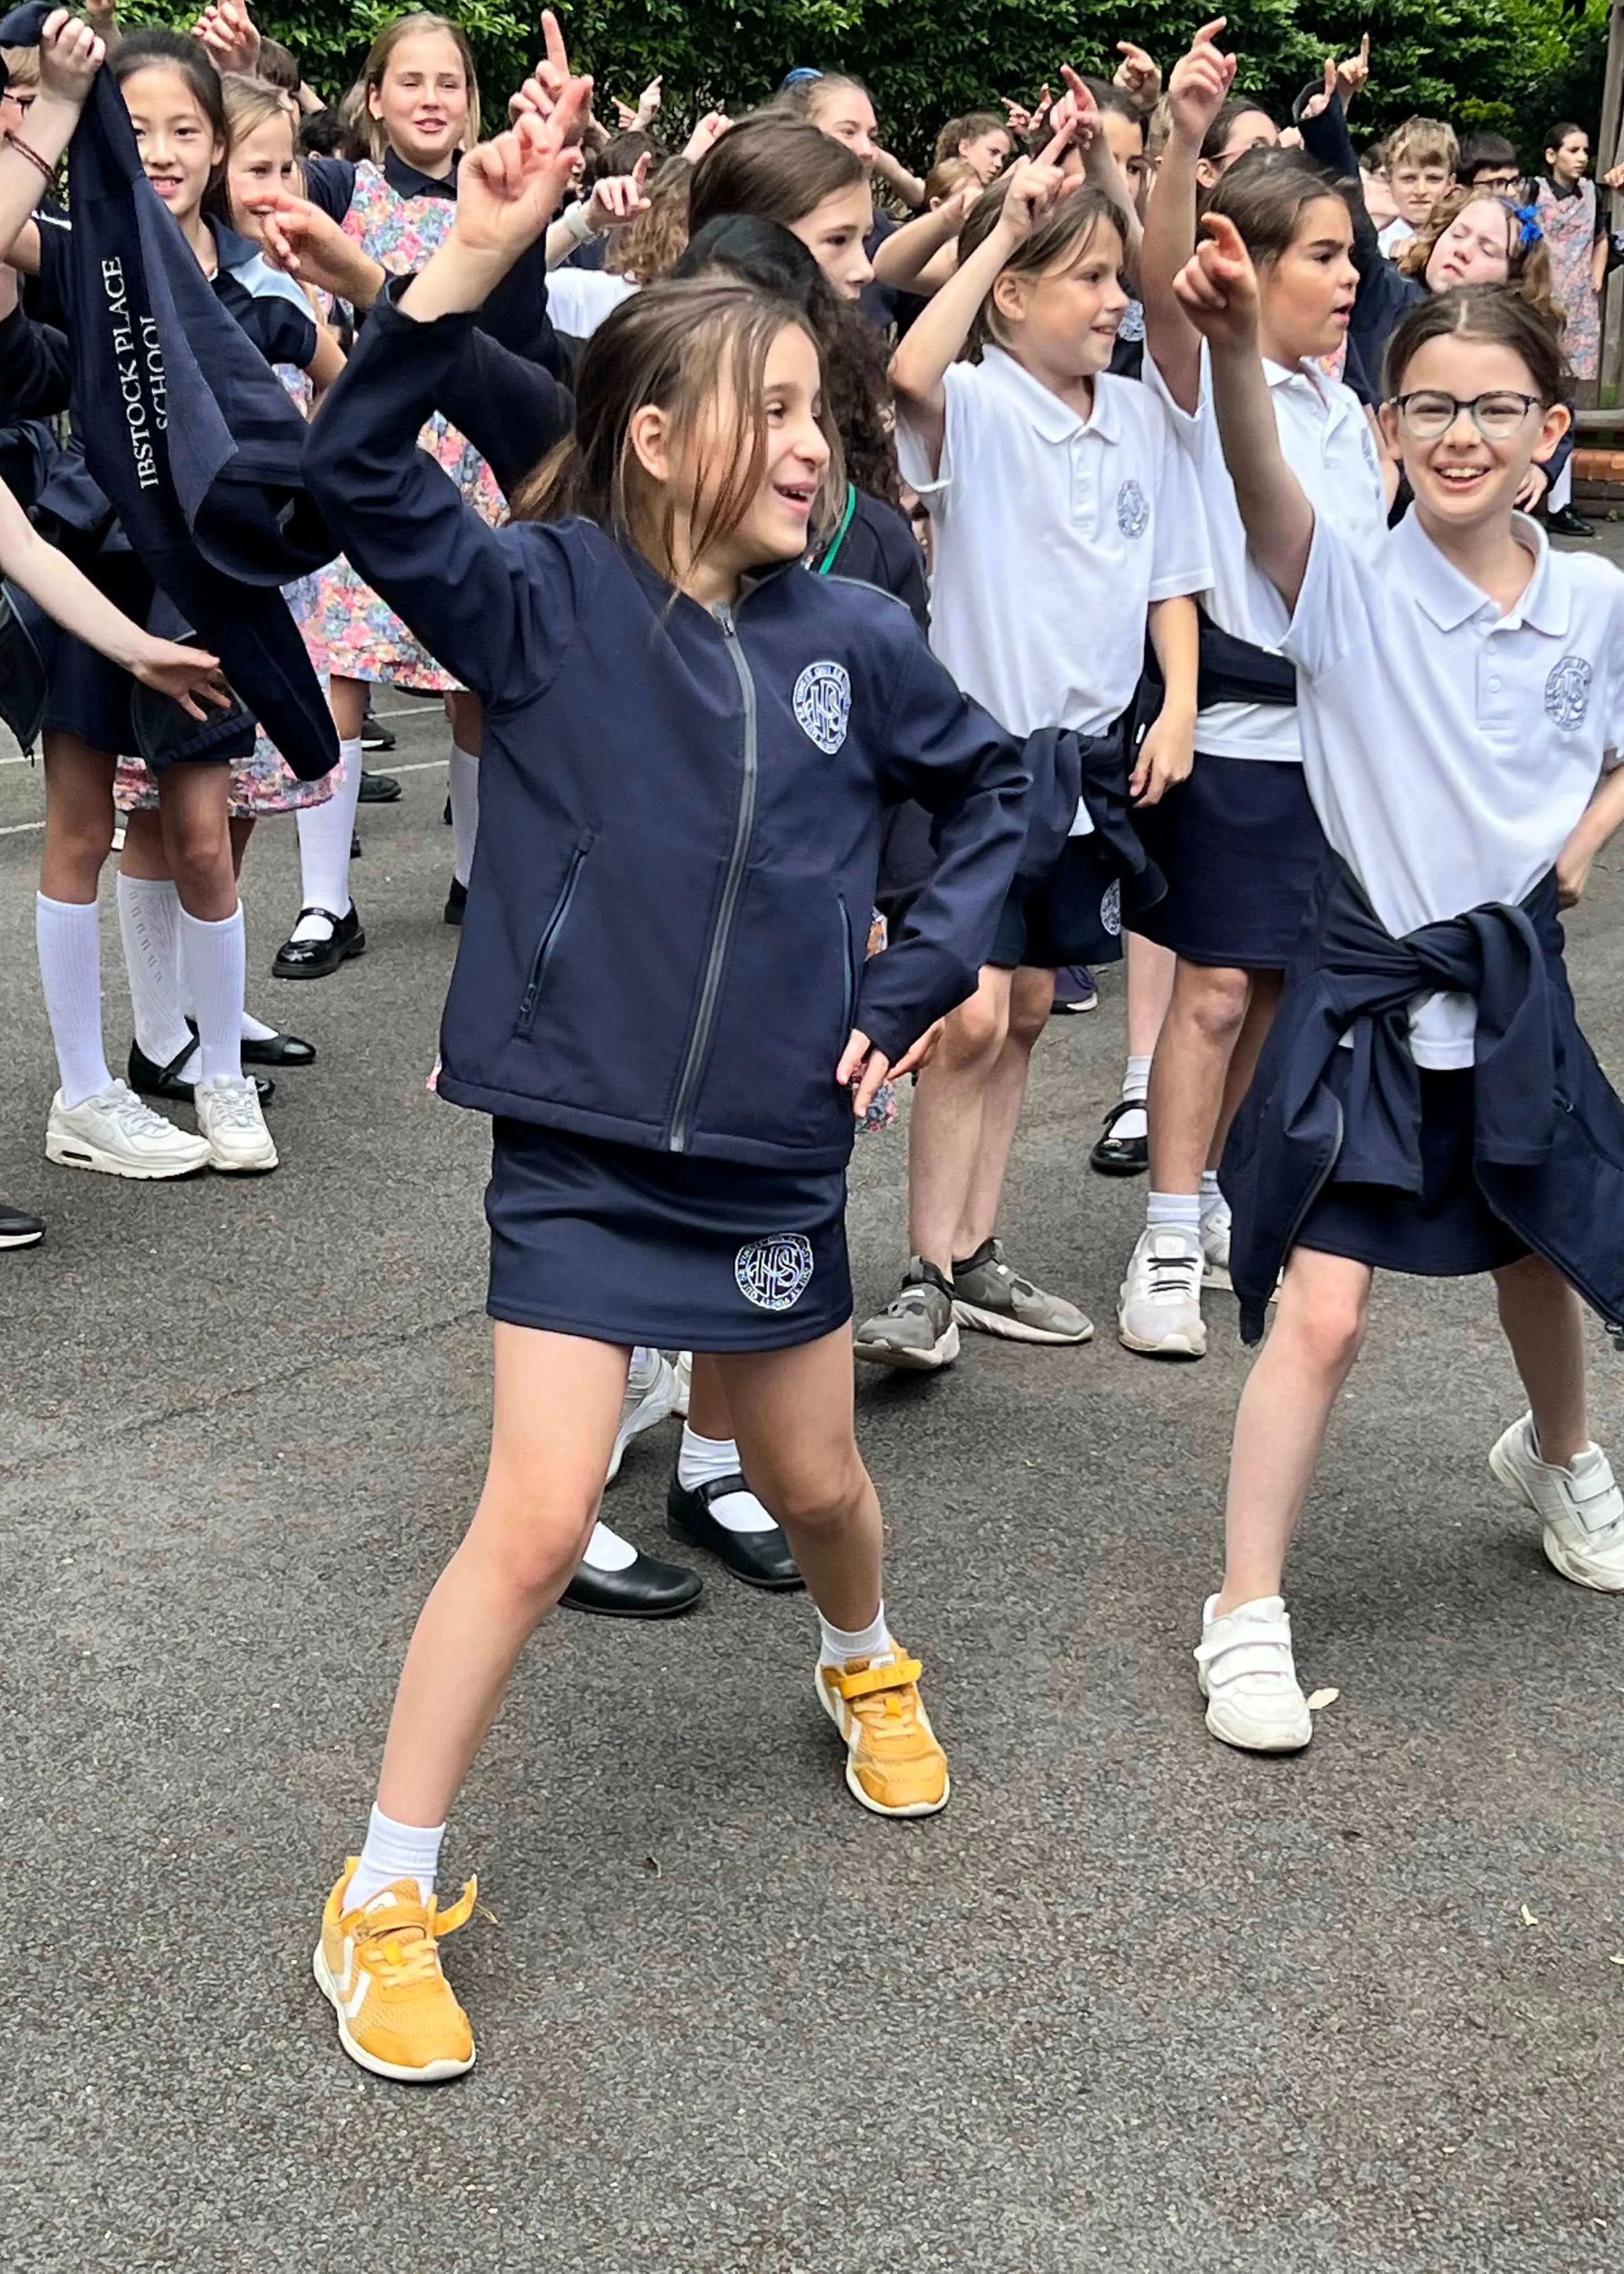 Prep pupils dancing on YMCA for Mental Health Awareness week at Ibstock Place School, a private school near Richmond, Barnes, Putney, Kingston, and Wandsworth on an overseas trip. 